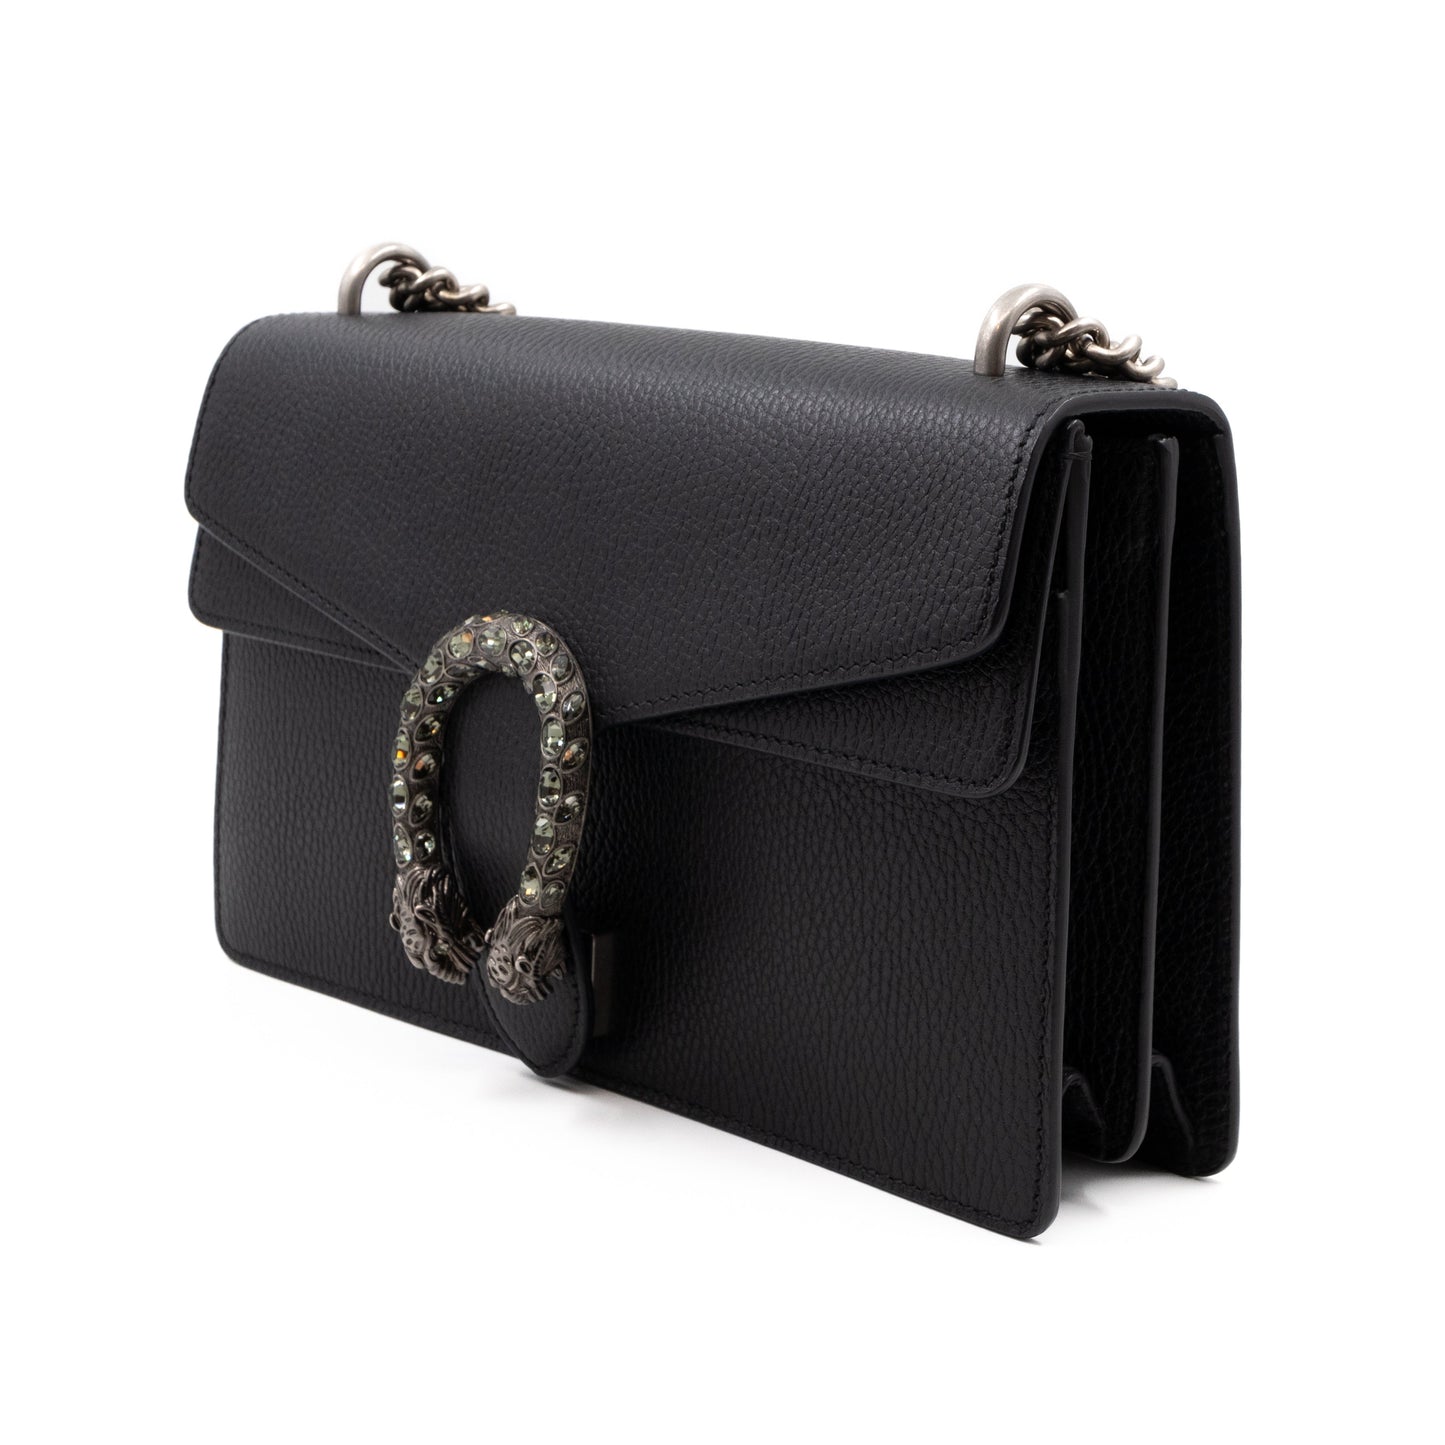 Dionysus Small Black Leather